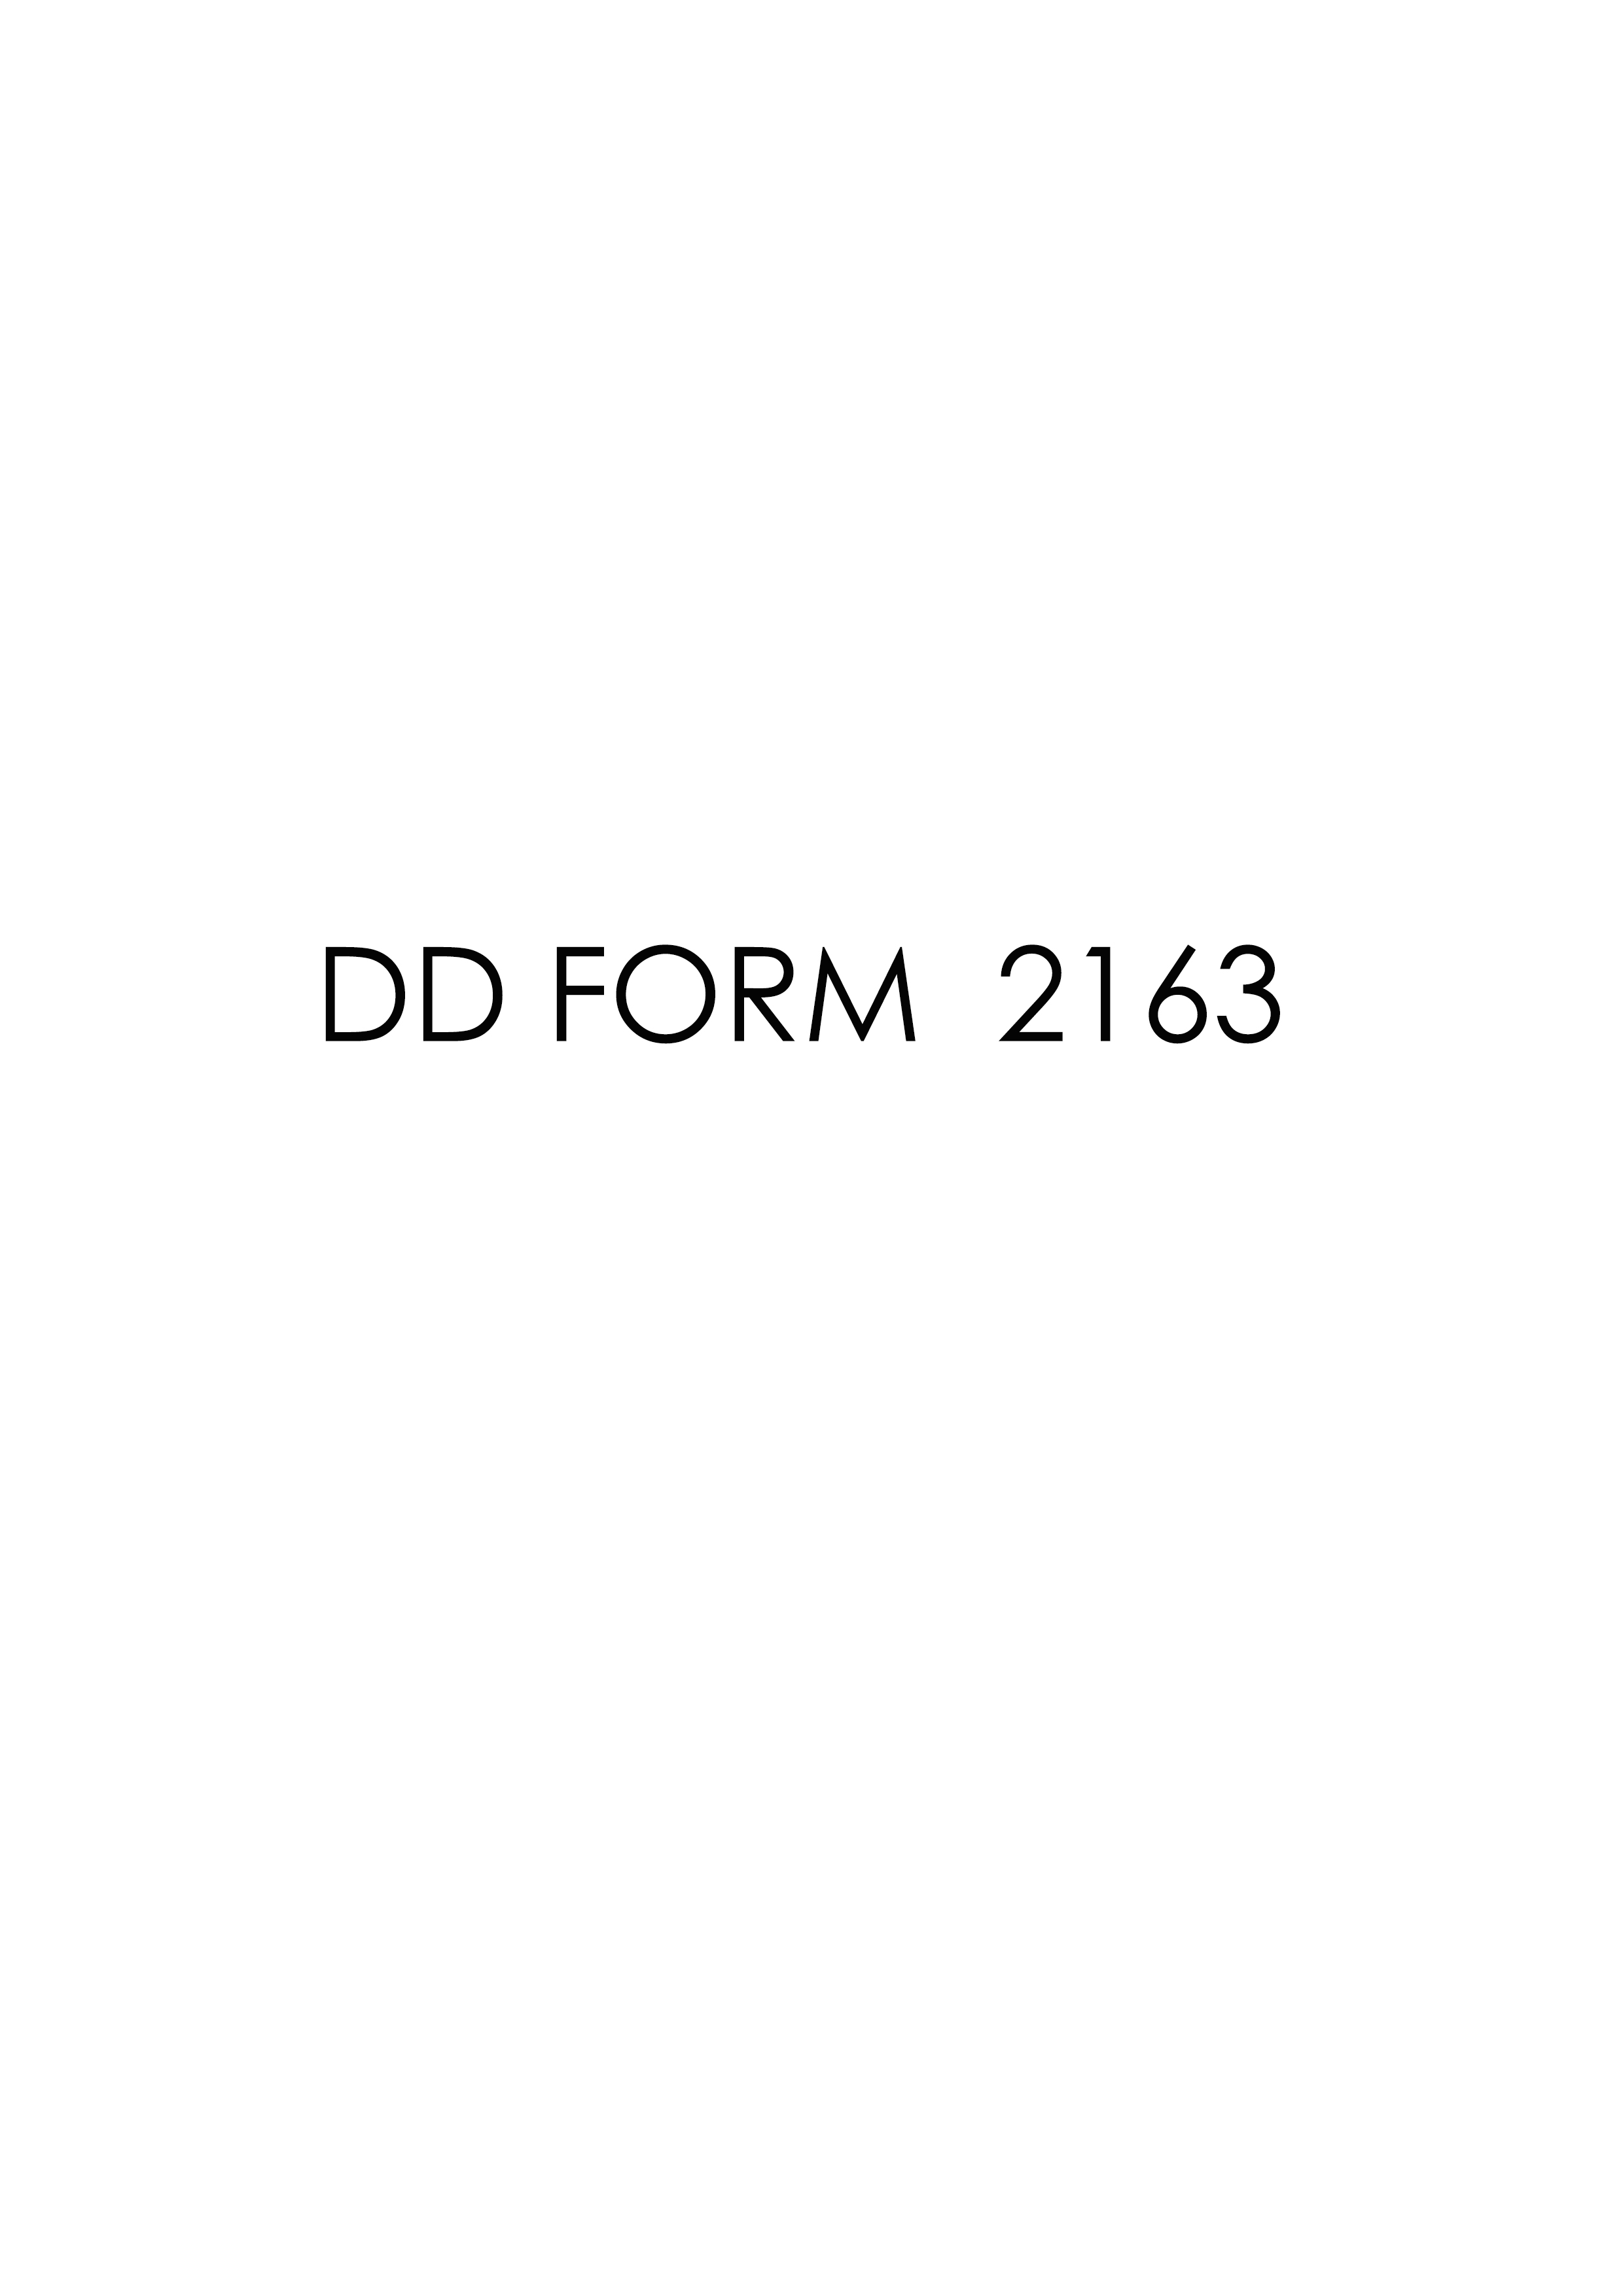 Download Fillable dd Form 2163